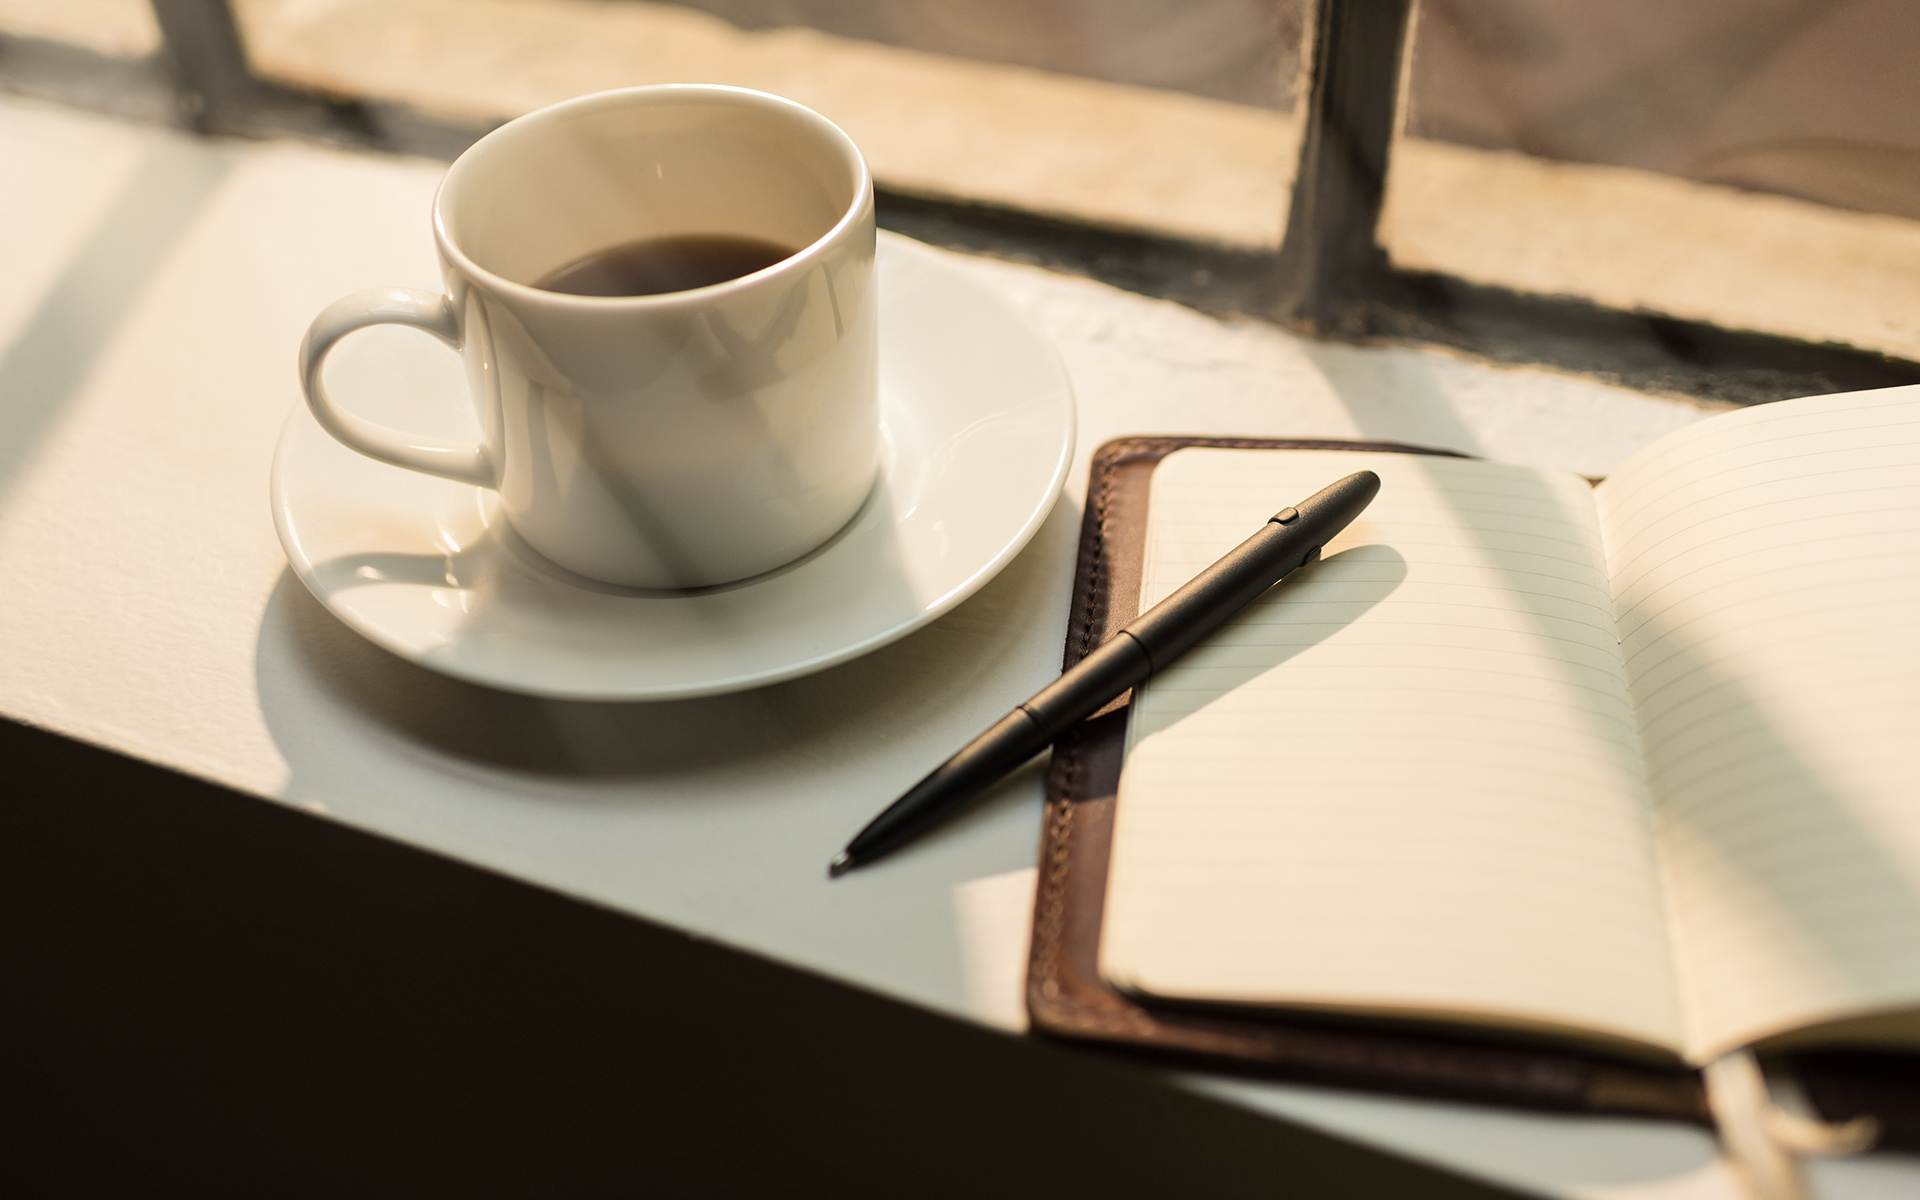 Journaling prompts to help you let go of limiting habits - Image of an open journal and coffee cup on a desk